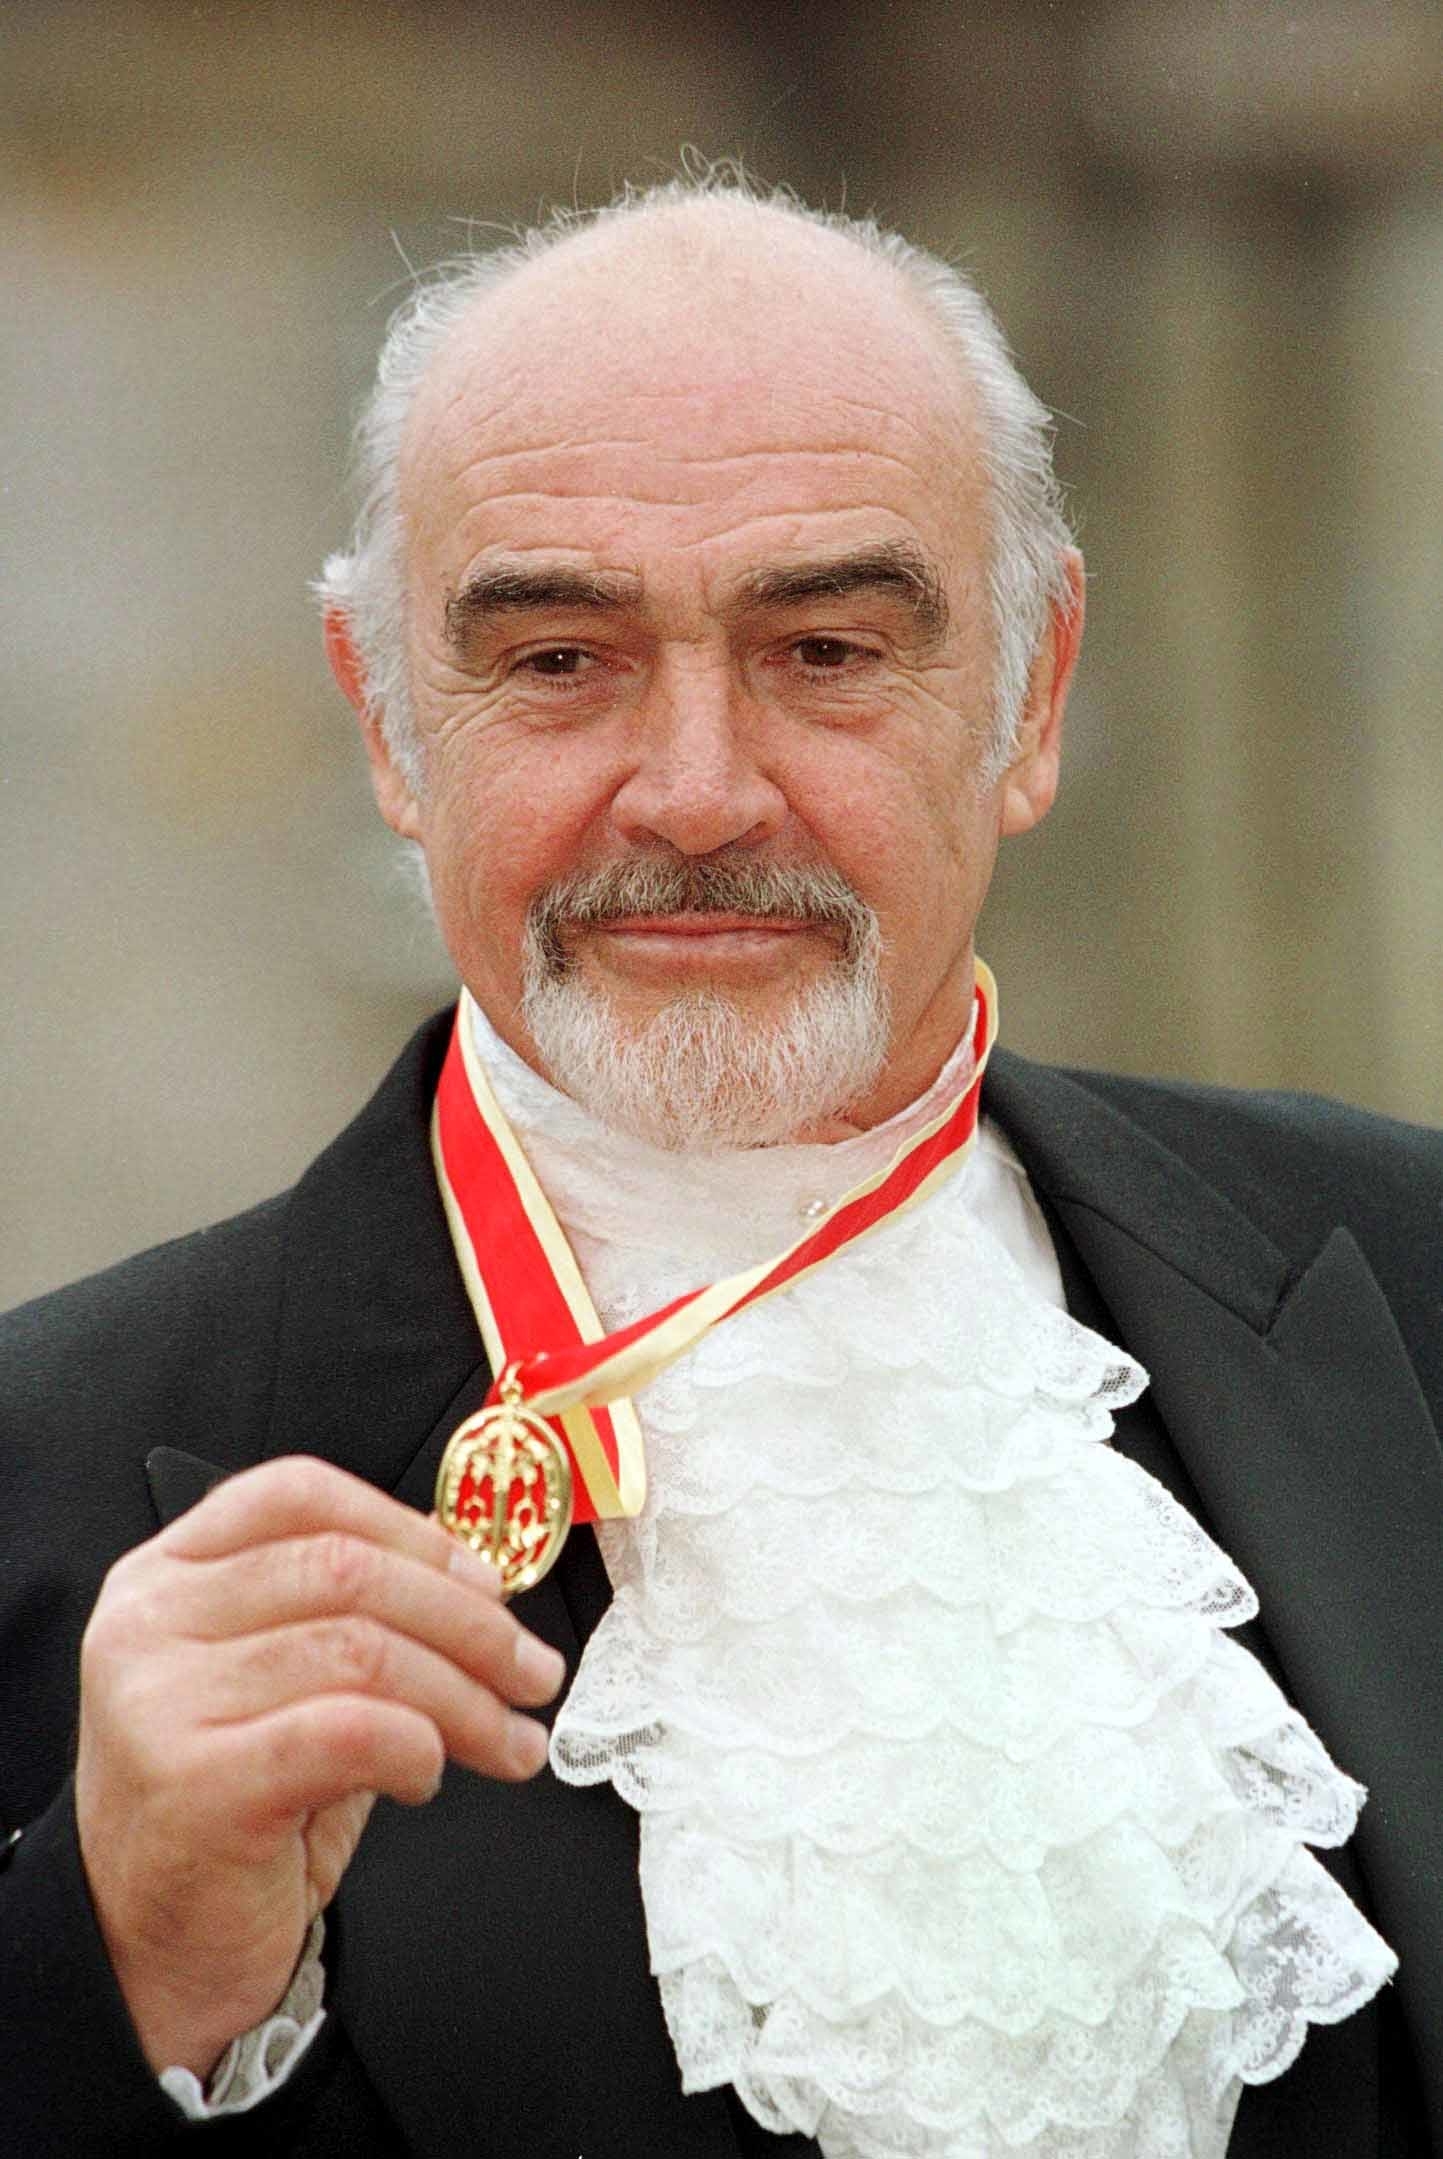 Man with a medal, wearing a suit and frilled cravat, smiling at the camera